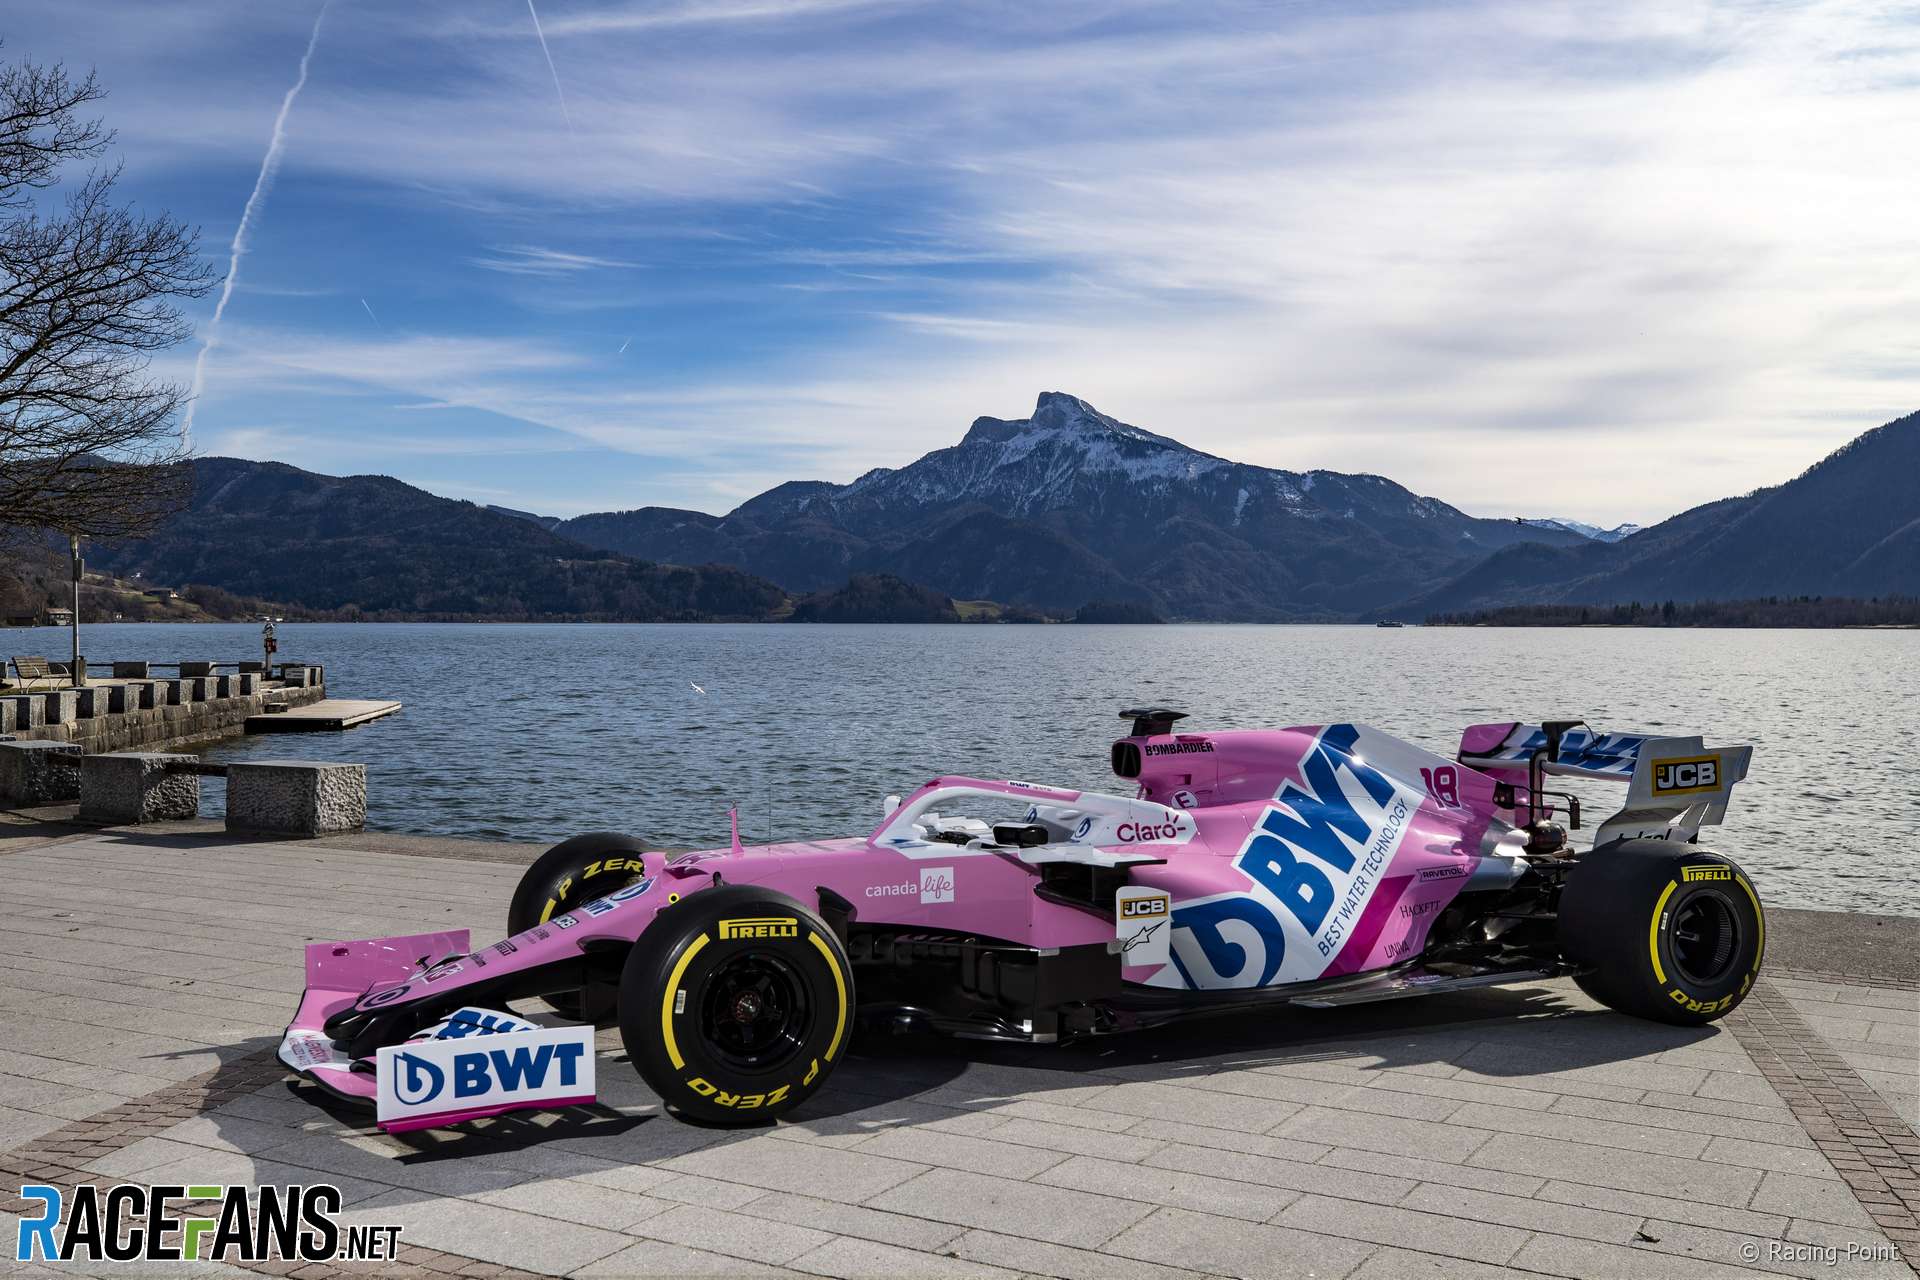 Racing Point 2020 livery on show car